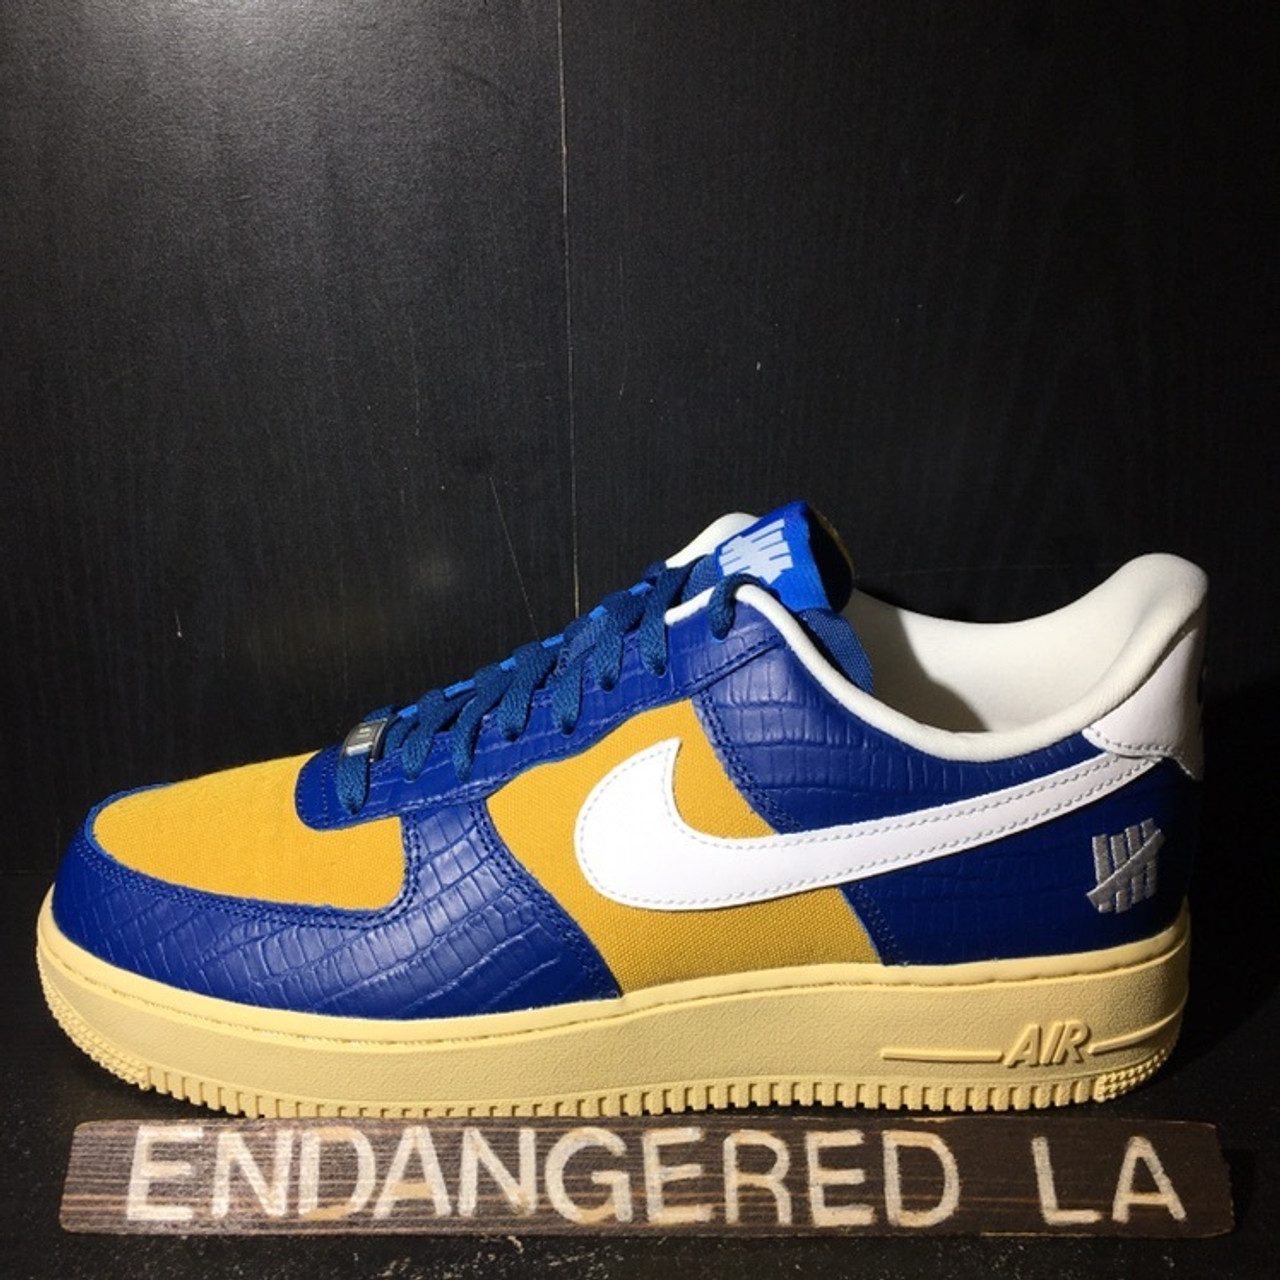 Nike Air Force 1 Low UNDFTD Blue Yellow Croc Sz 9.5 (#20265)